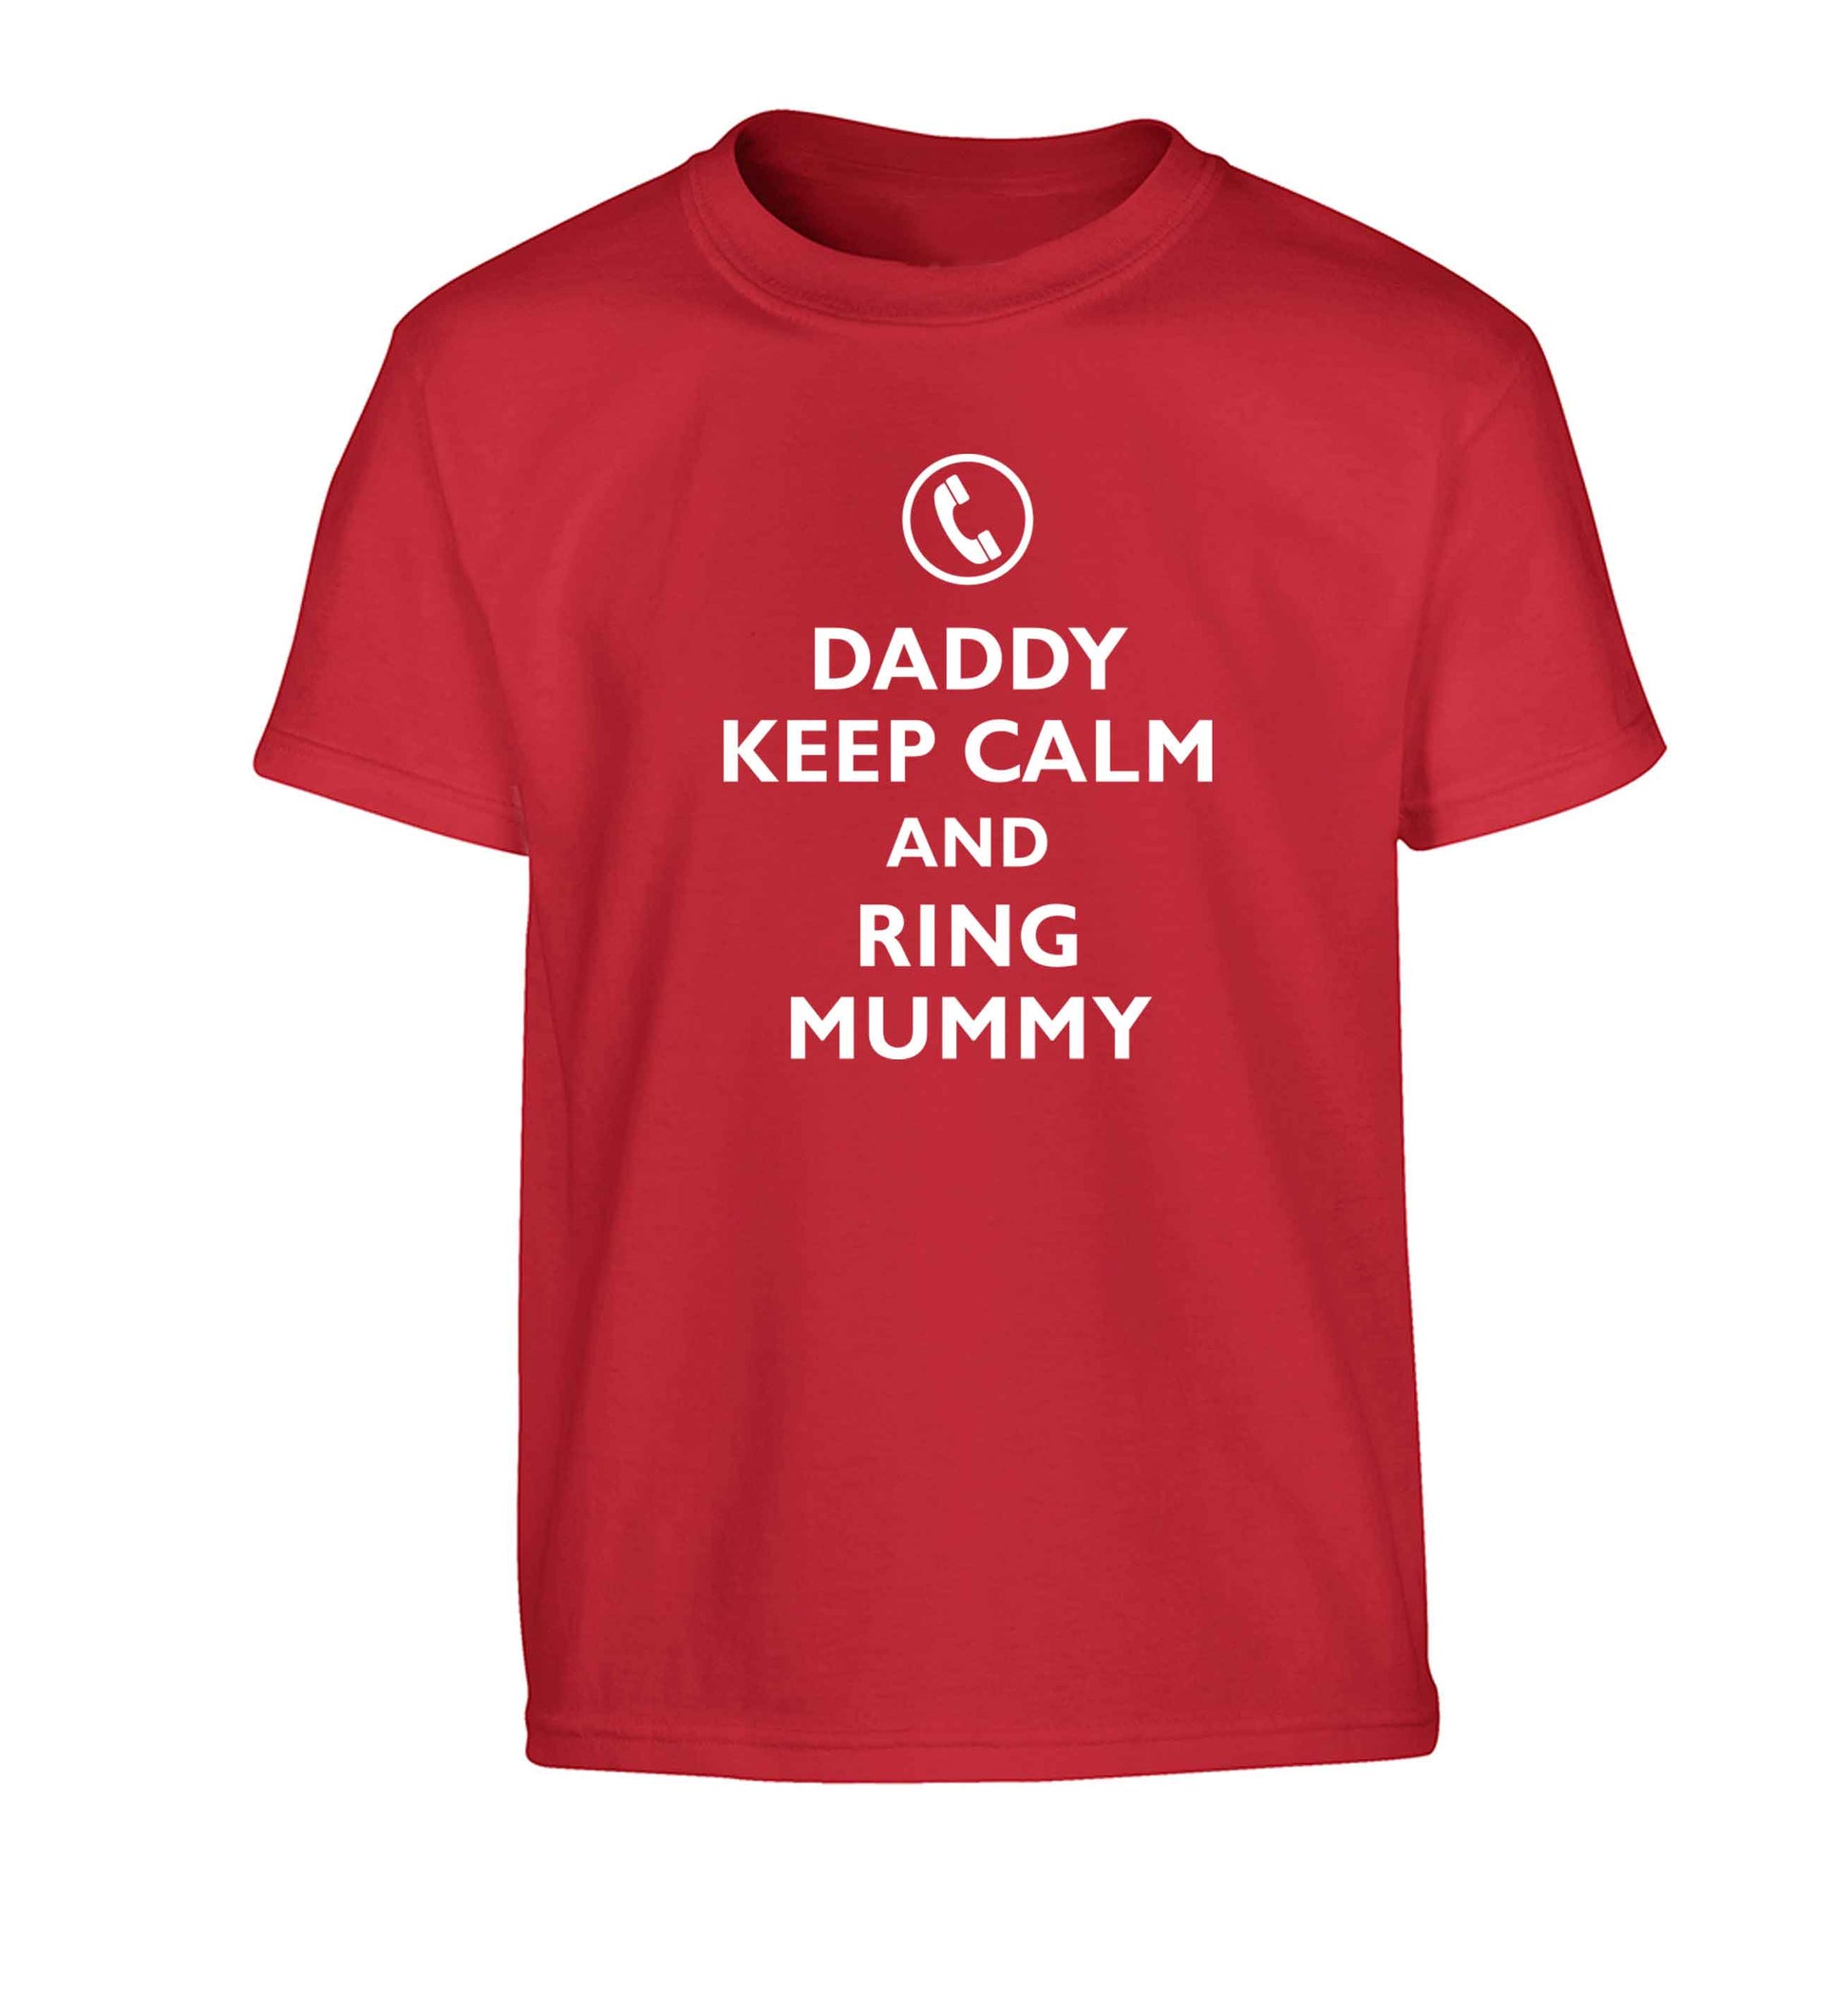 Daddy keep calm and ring mummy Children's red Tshirt 12-13 Years